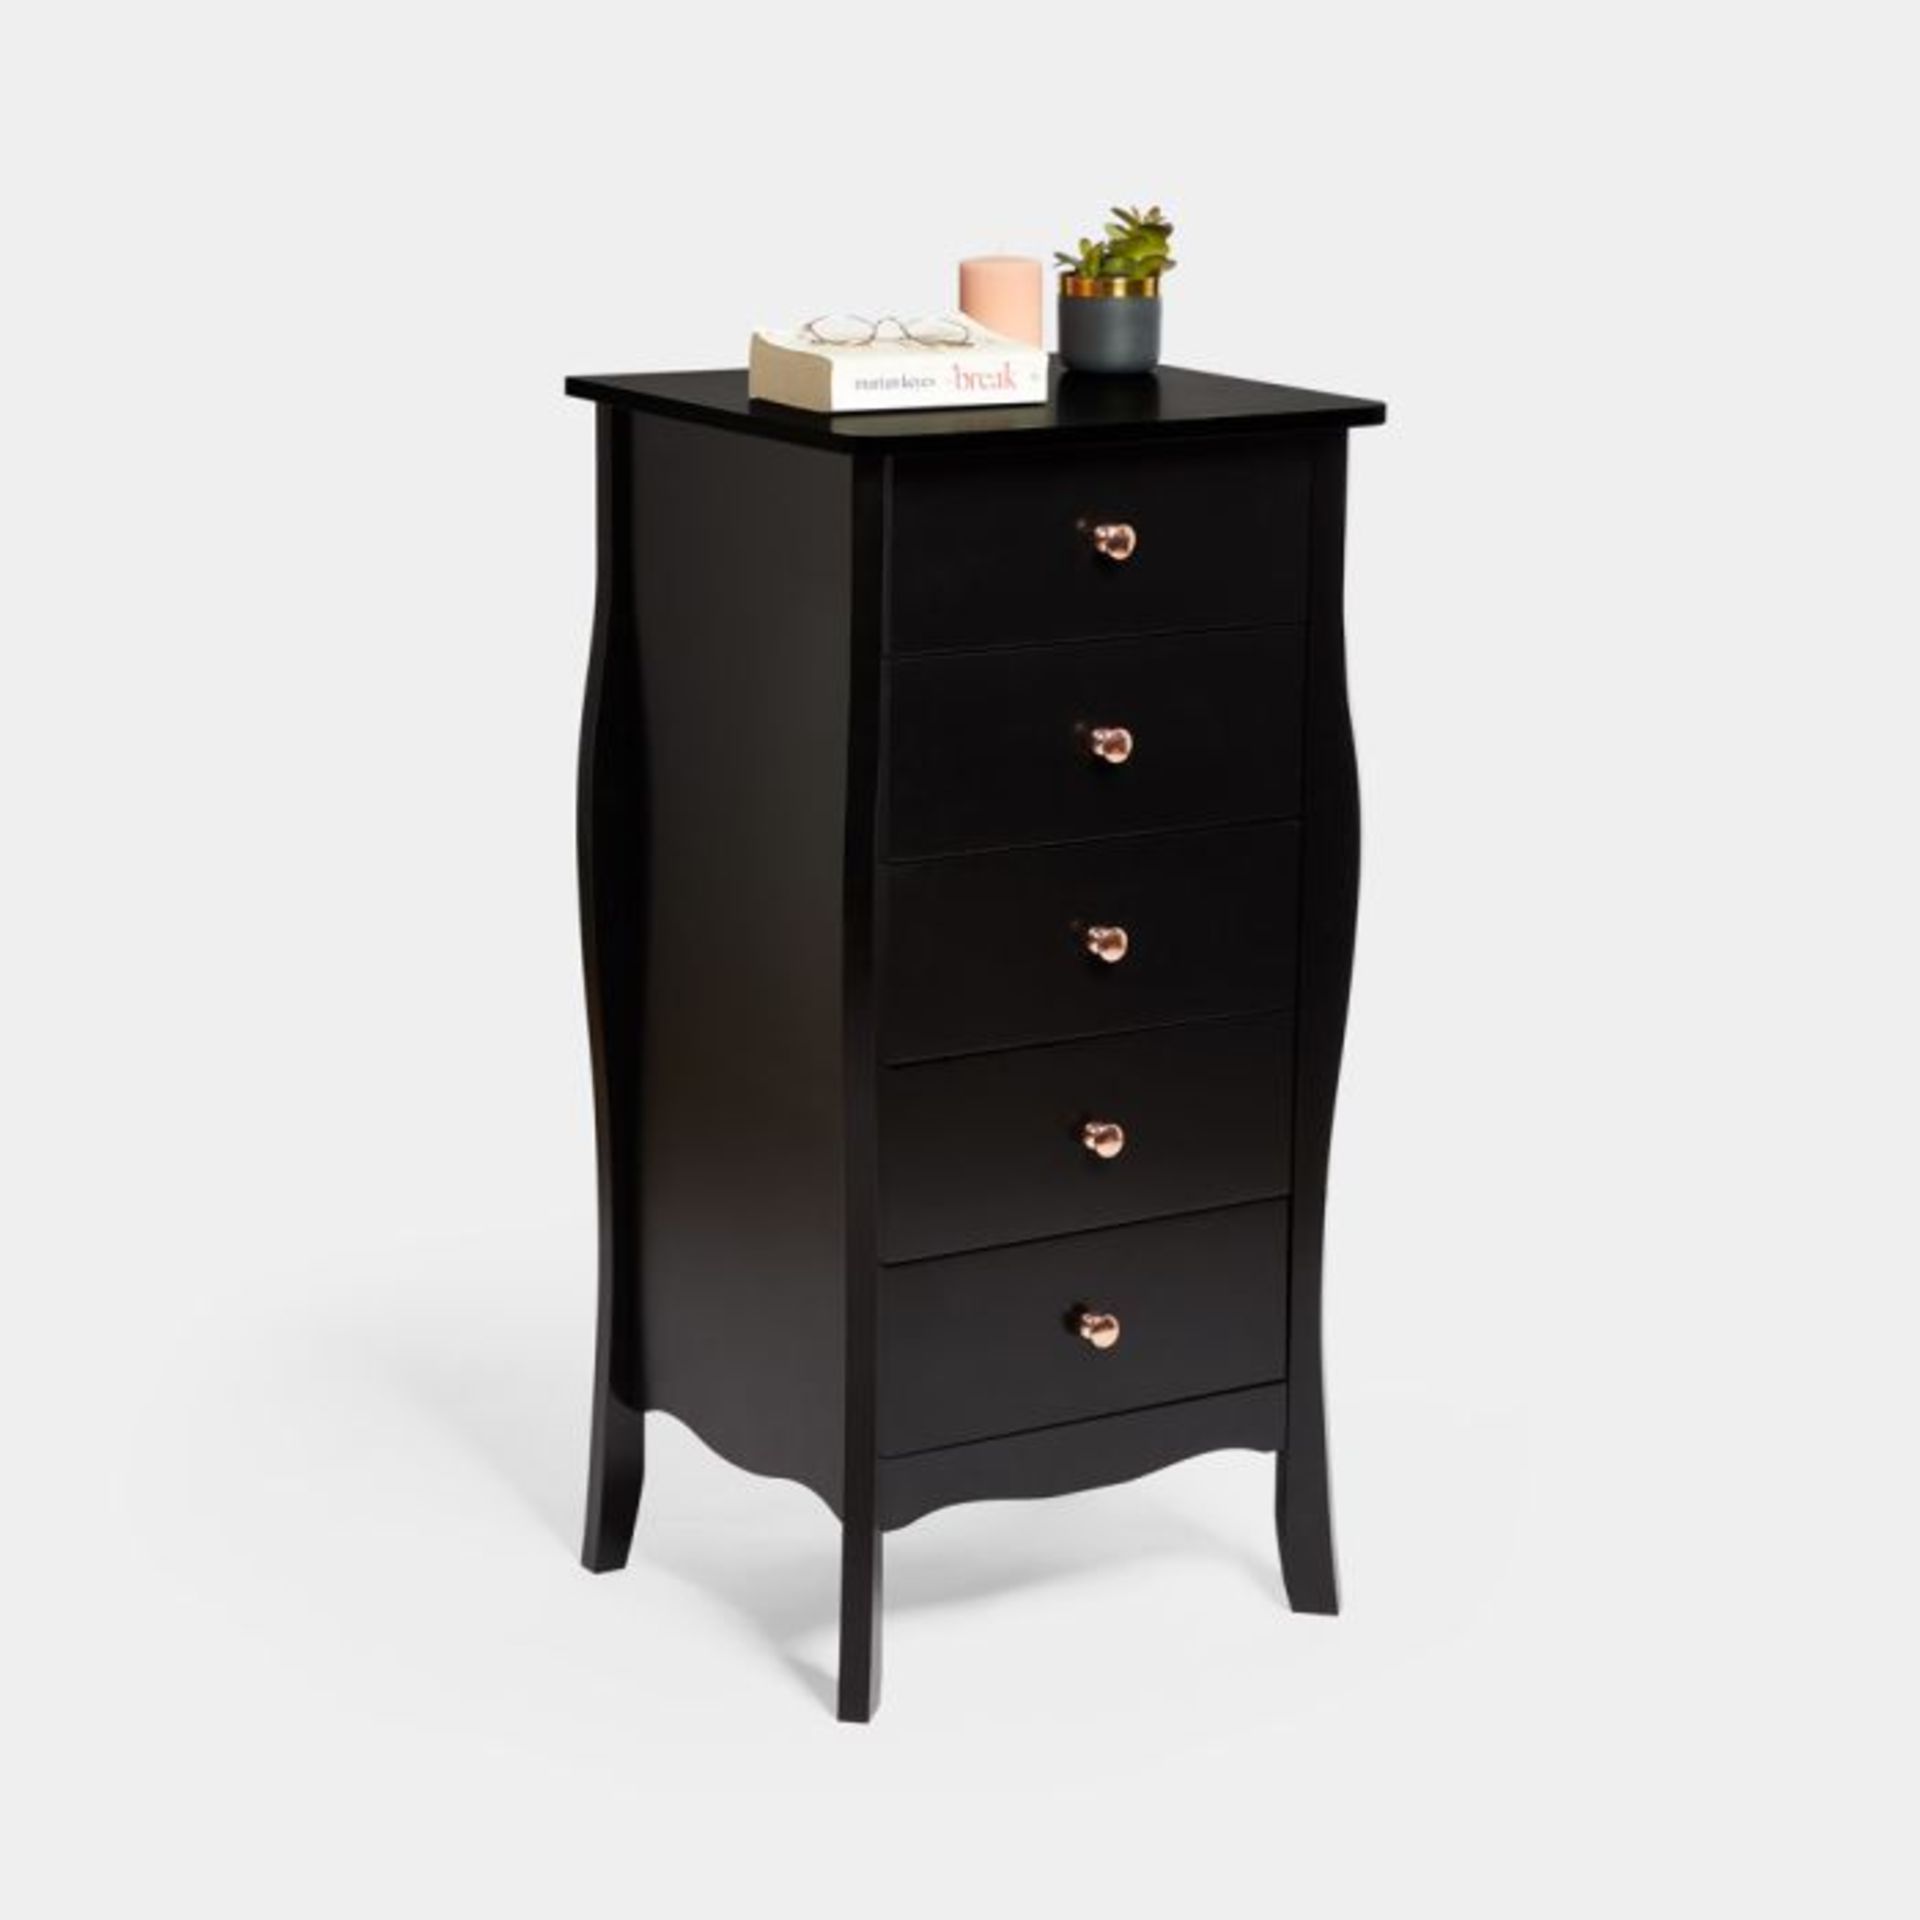 Sophia Black Narrow Chest of Drawers. - ER33. The unit’s curved edges and timeless style make it the